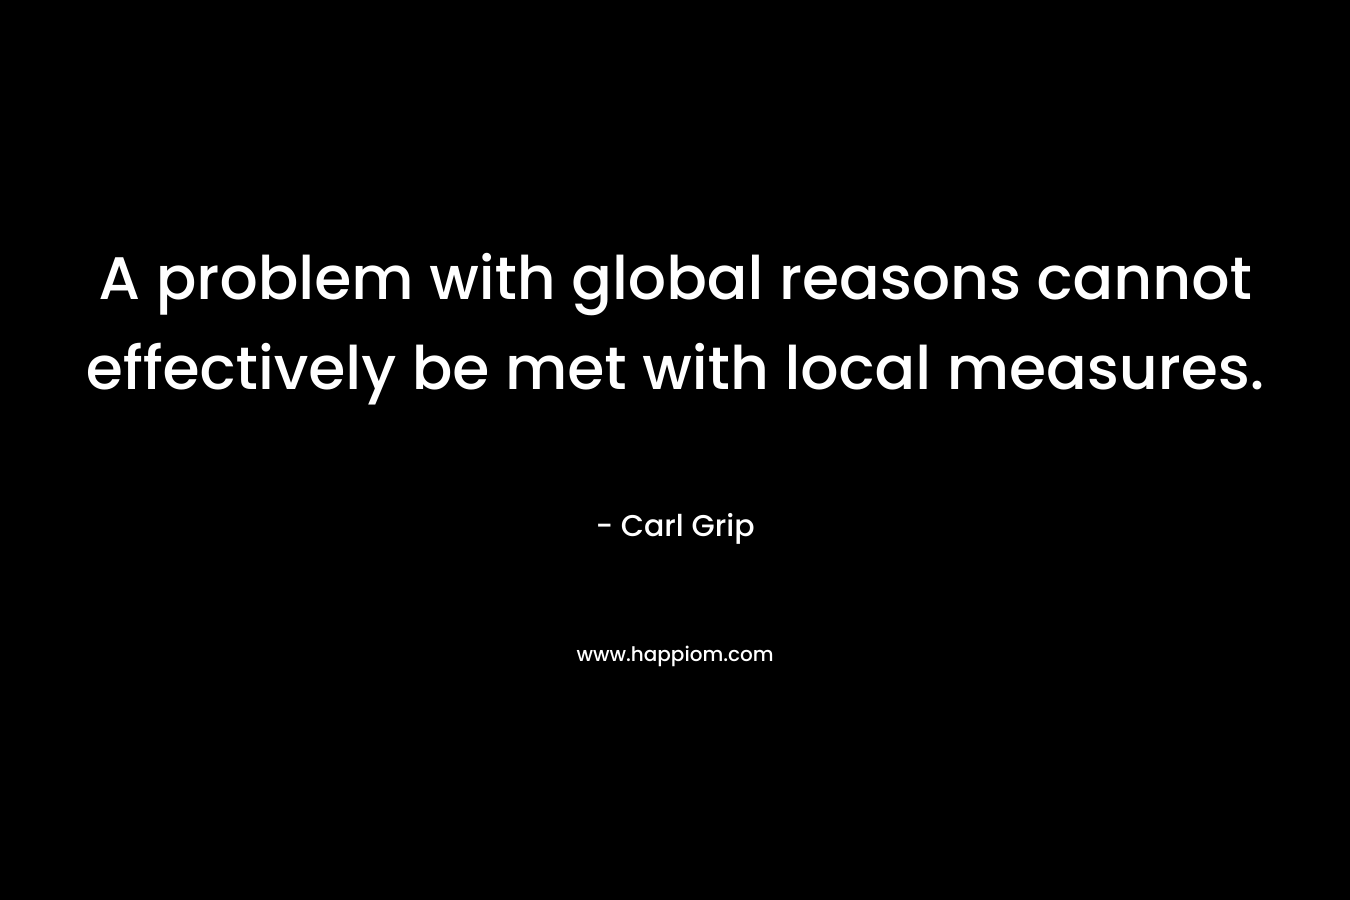 A problem with global reasons cannot effectively be met with local measures.